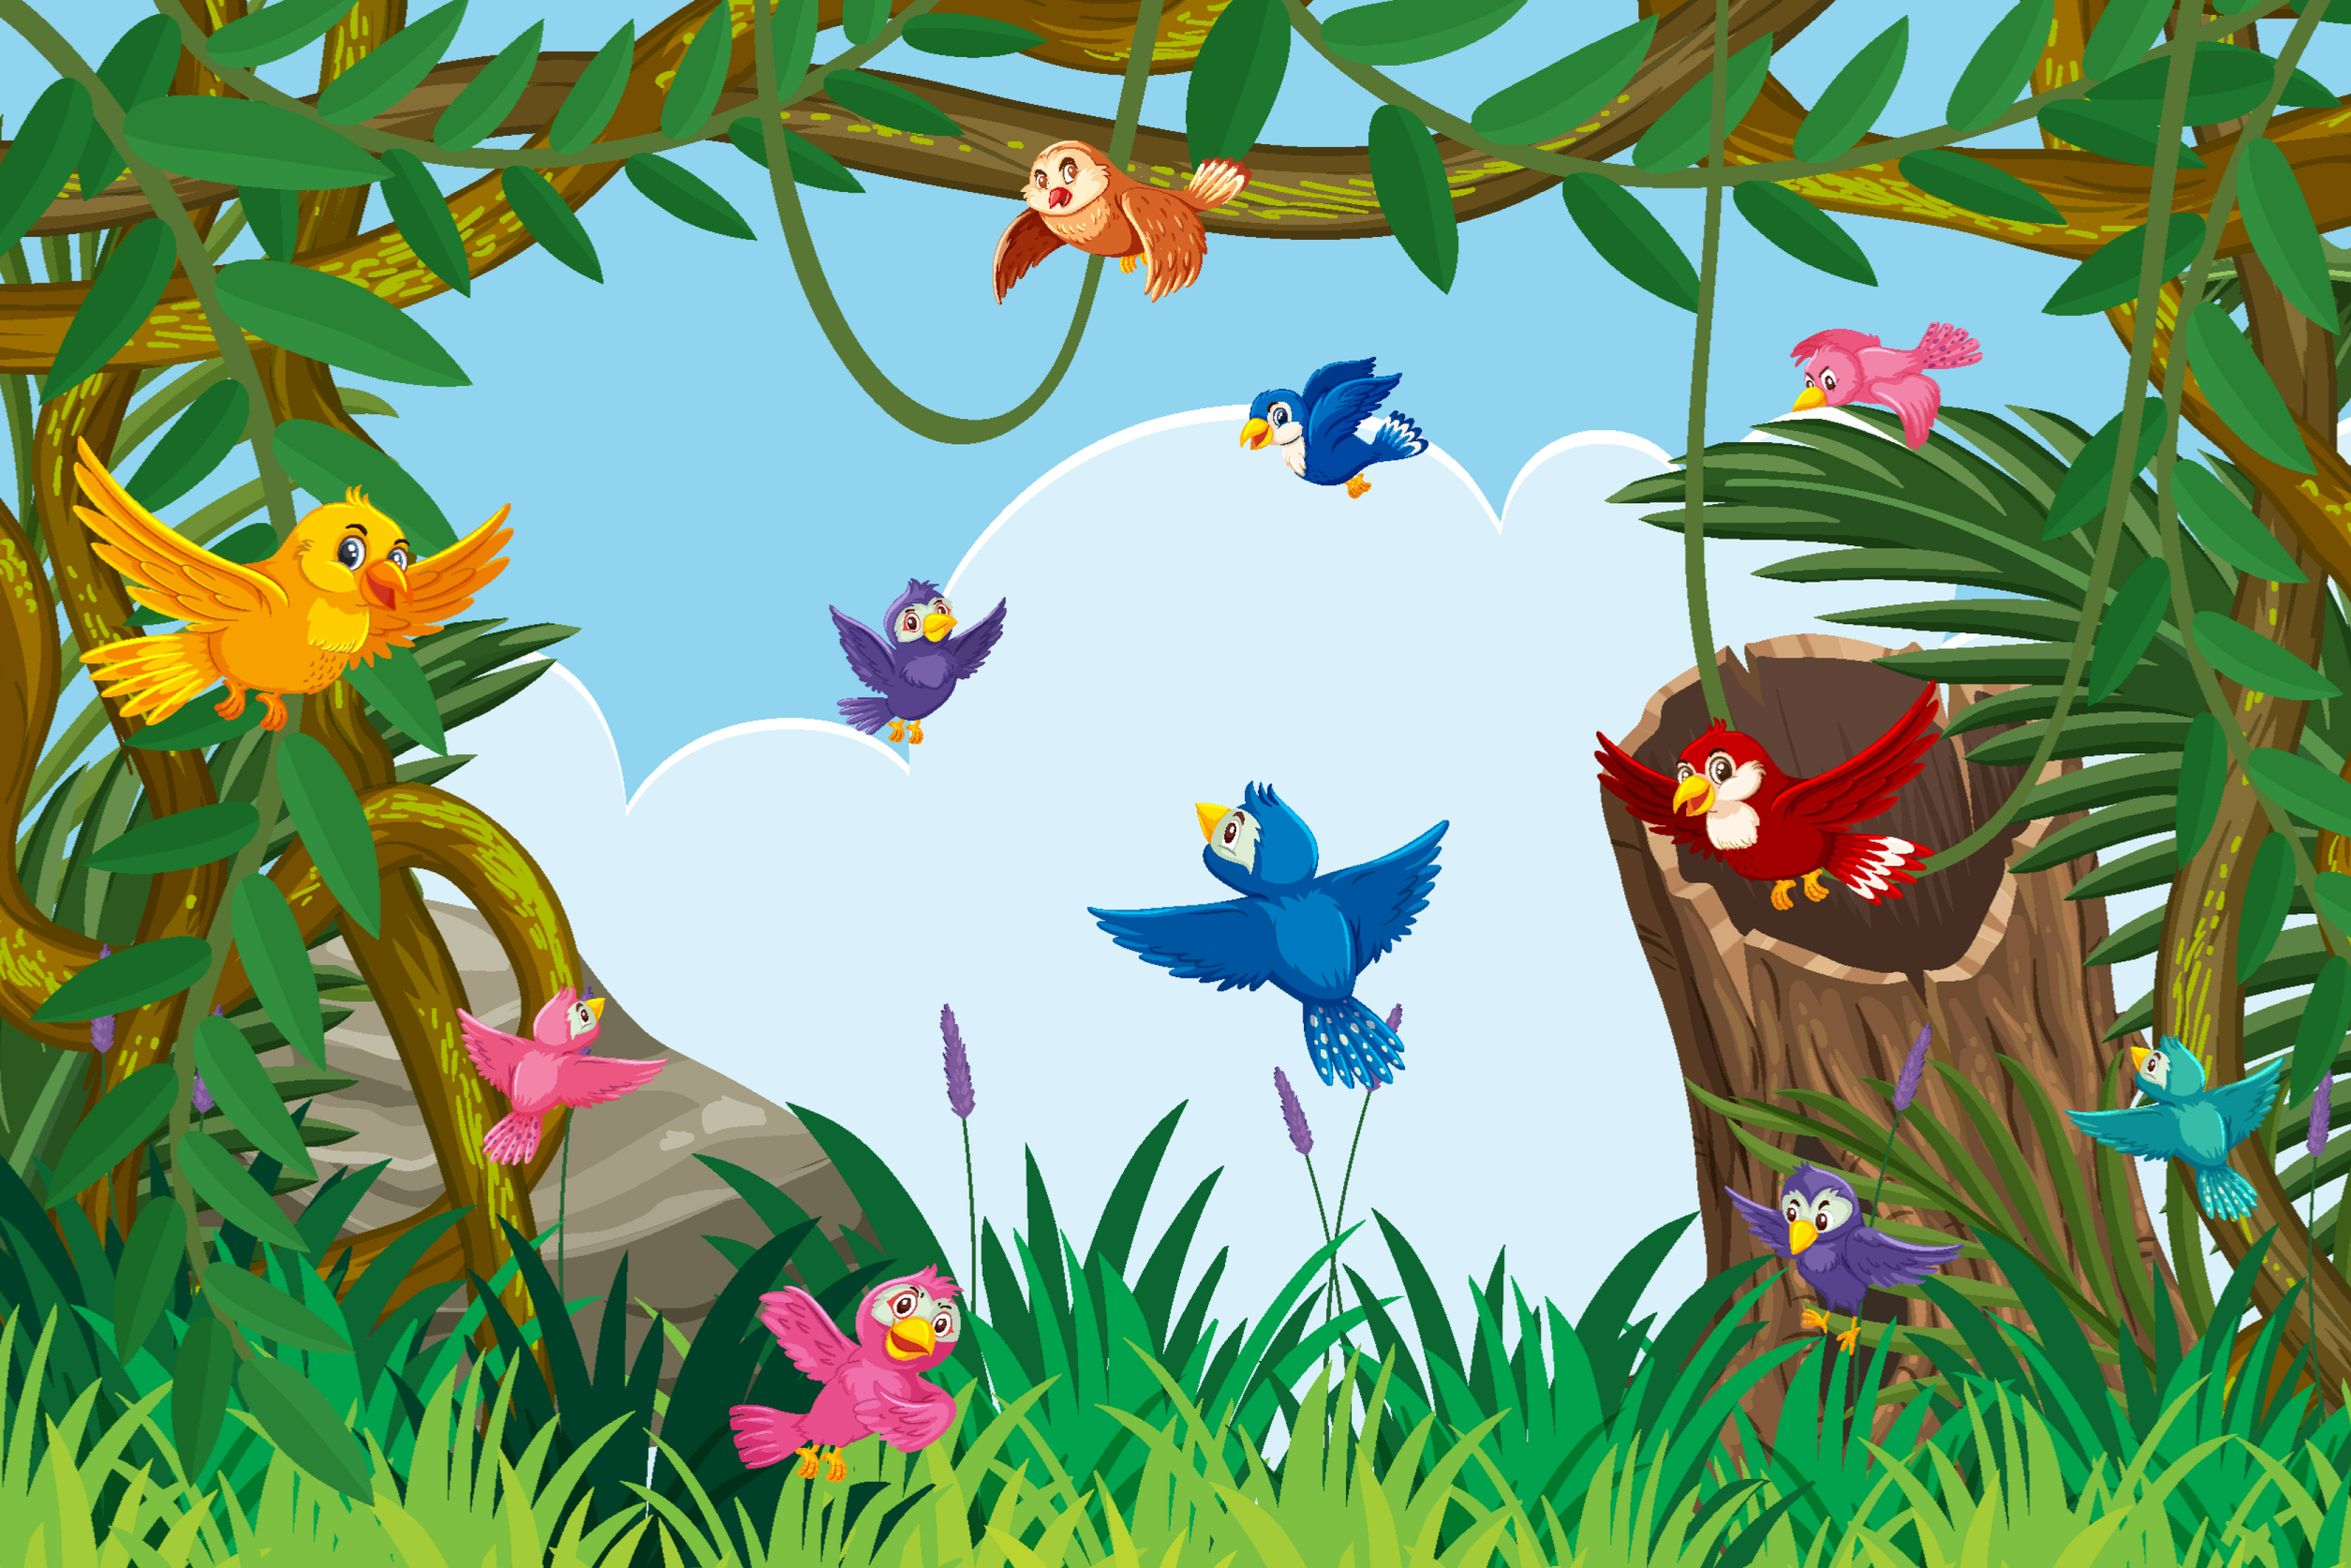 Small colourful birds fly around a clearing in a forest.